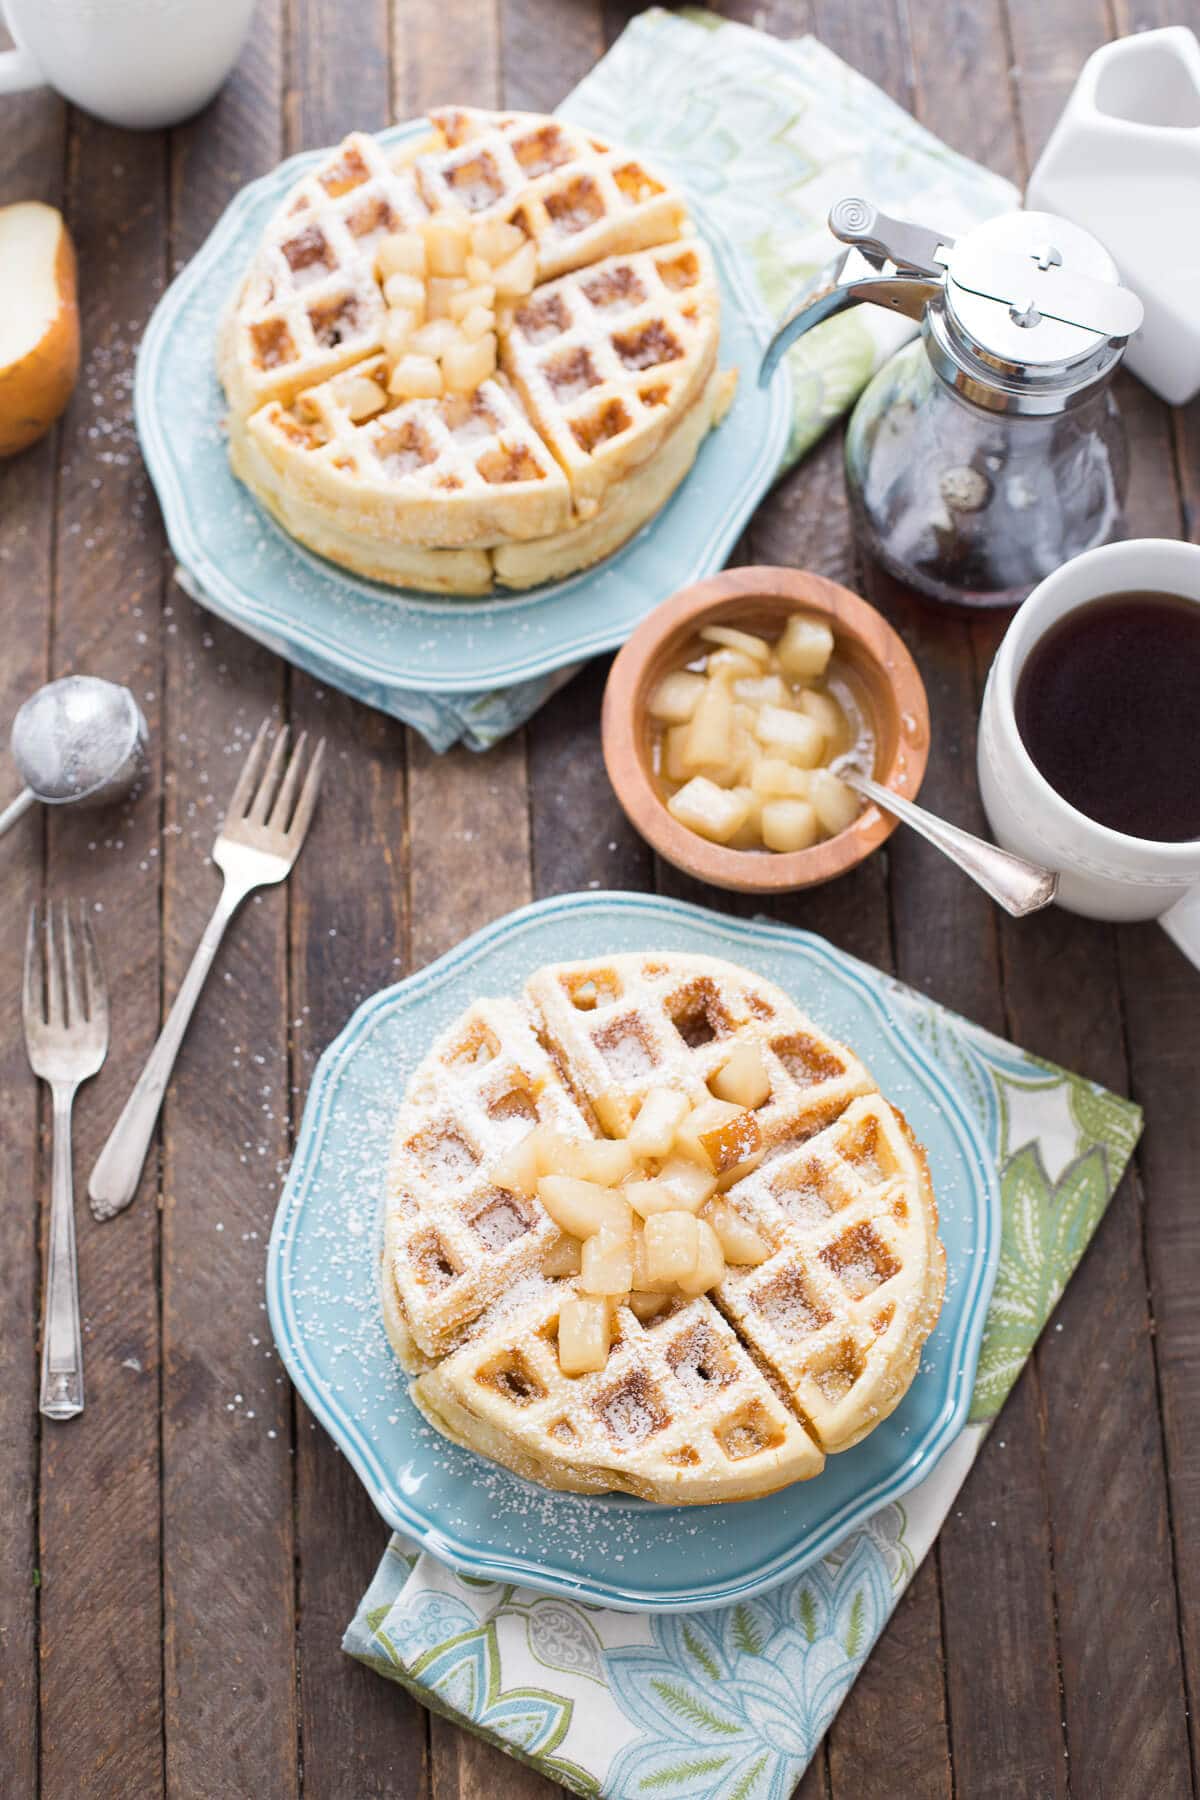 You have serve yourself some homemade waffles! These are made with browned butter and topped with rum spiced pears!